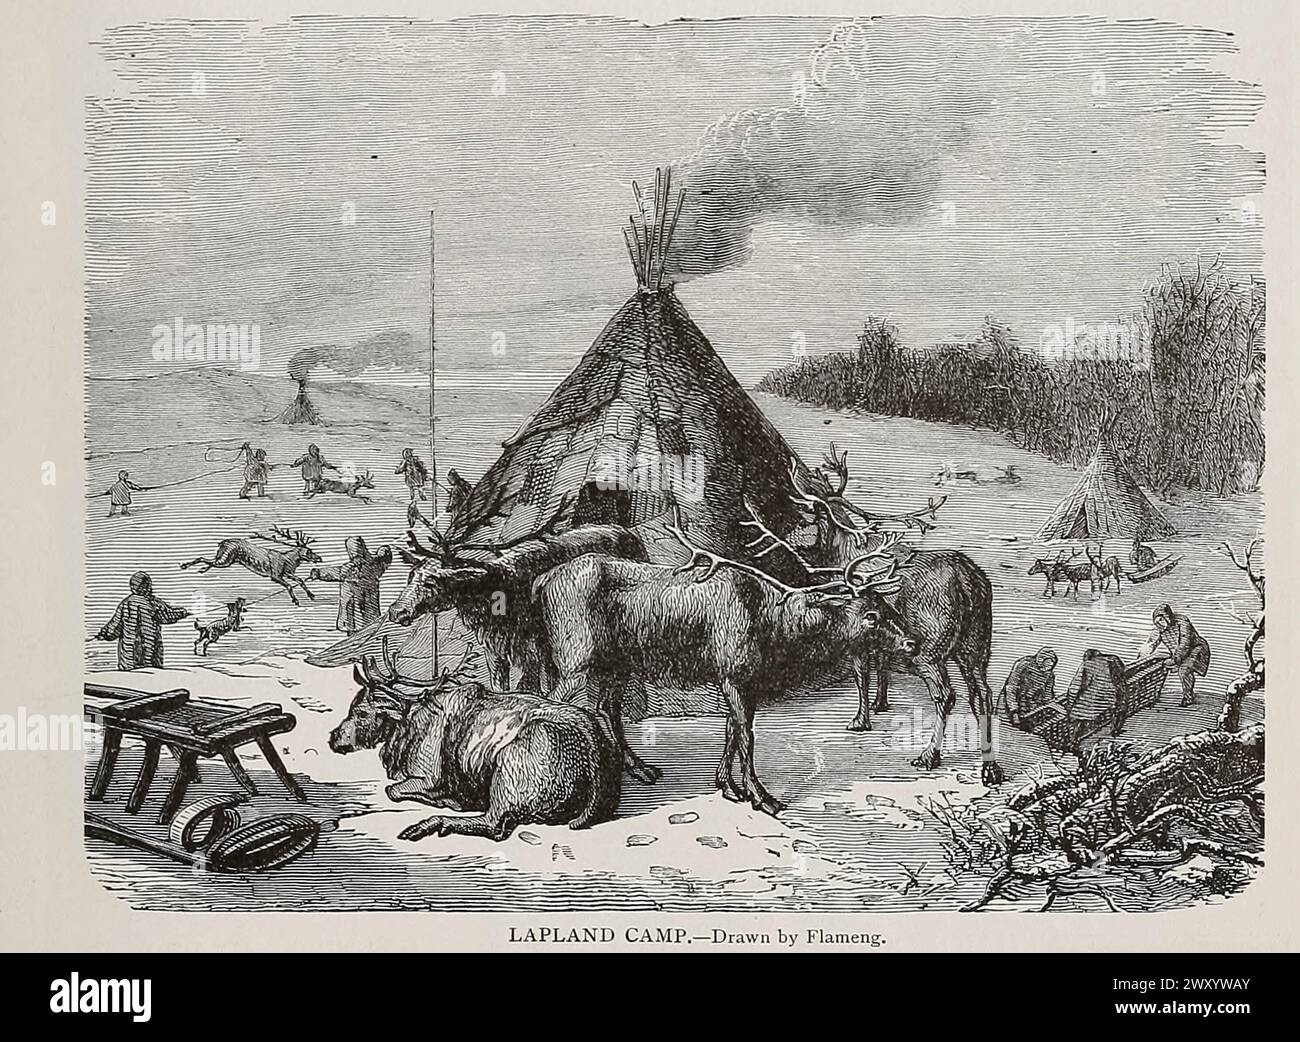 Lapland Camp from Cyclopedia universal history : embracing the most complete and recent presentation of the subject in two principal parts or divisions of more than six thousand pages by John Clark Ridpath, 1840-1900 Publication date 1895 Publisher Boston : Balch Bros. Volume 7 History of Man Stock Photo